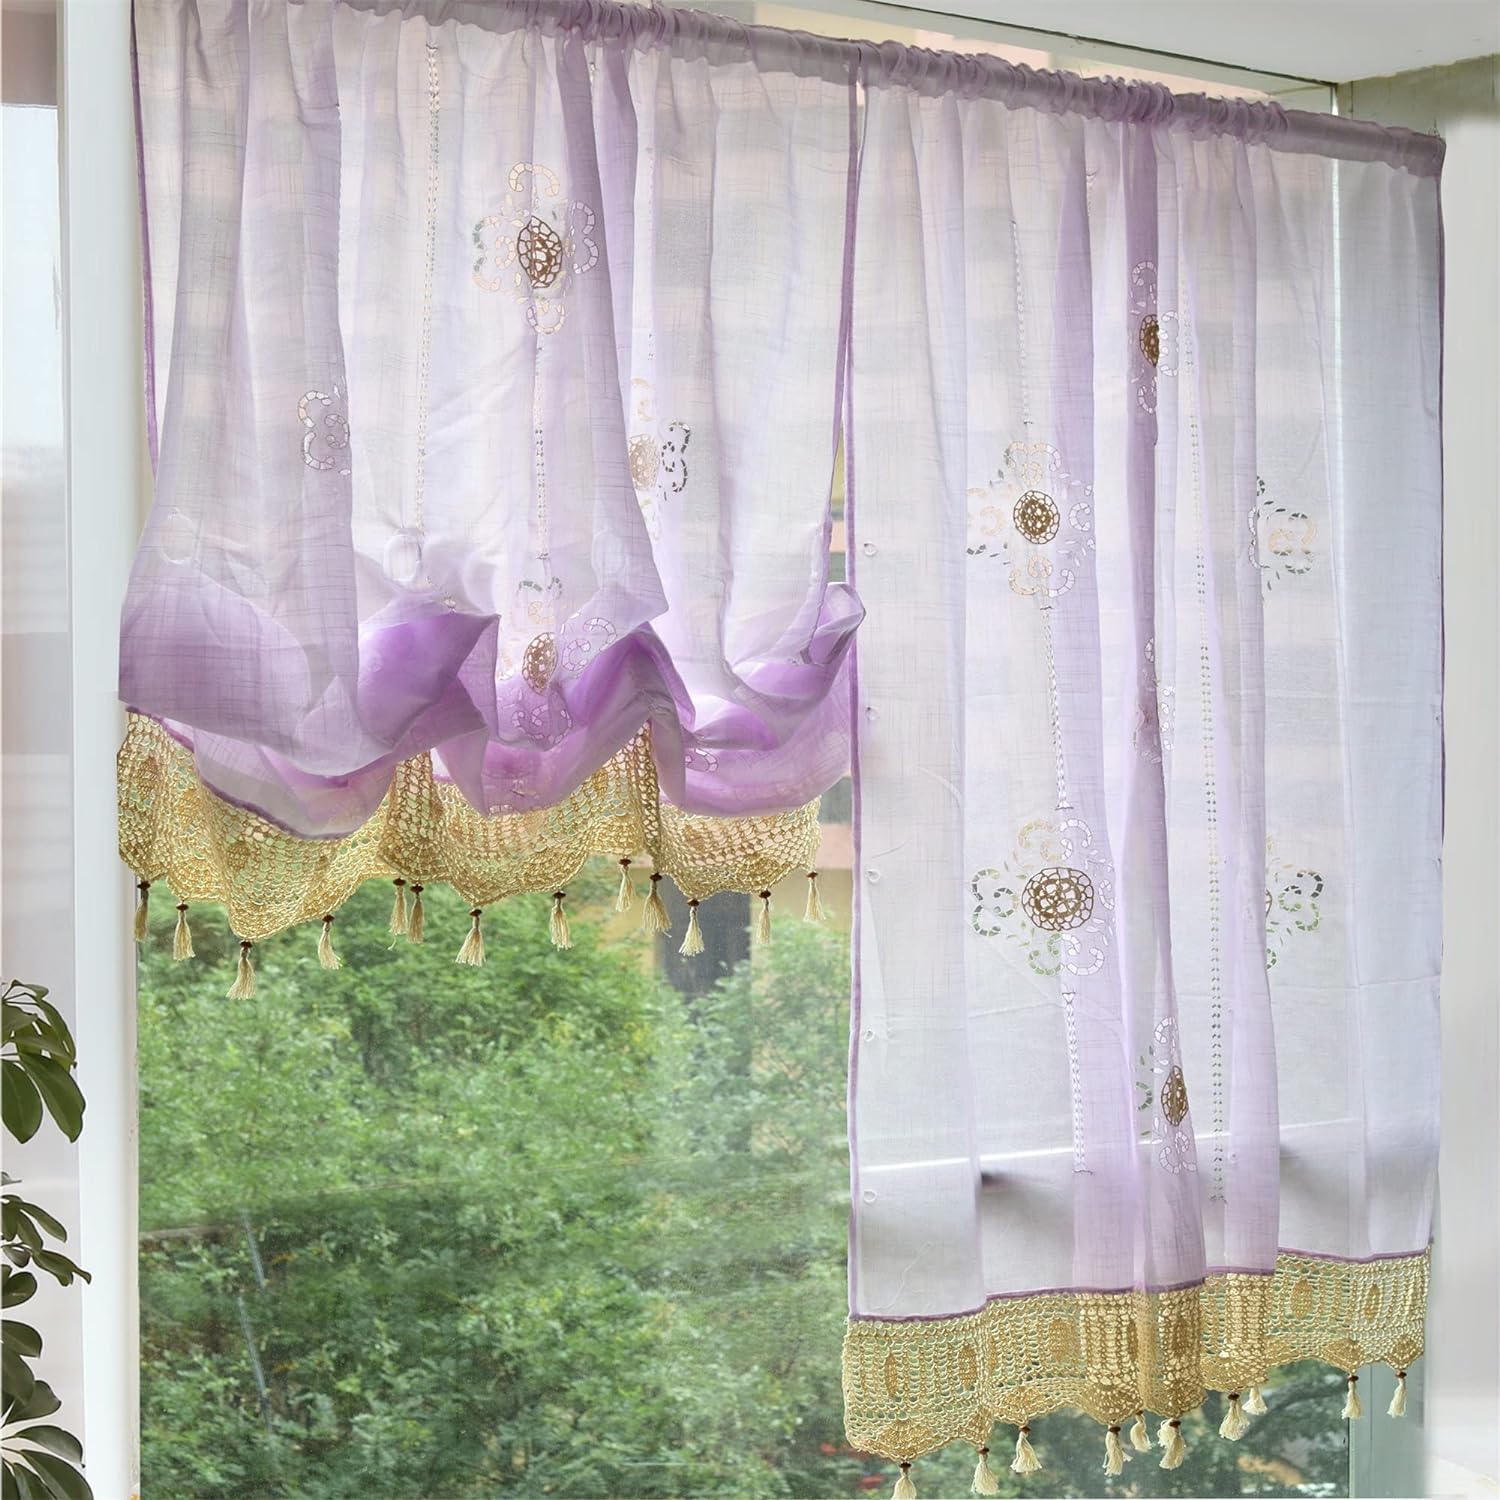 FADFAY Light Purple Embroidered Curtains for Living Room Balloon Curtain with Tassels Floral Window Drapes for Girls Stylish Single Layer Room Darkening Curtains for Bedroom (57 W, 69 H)